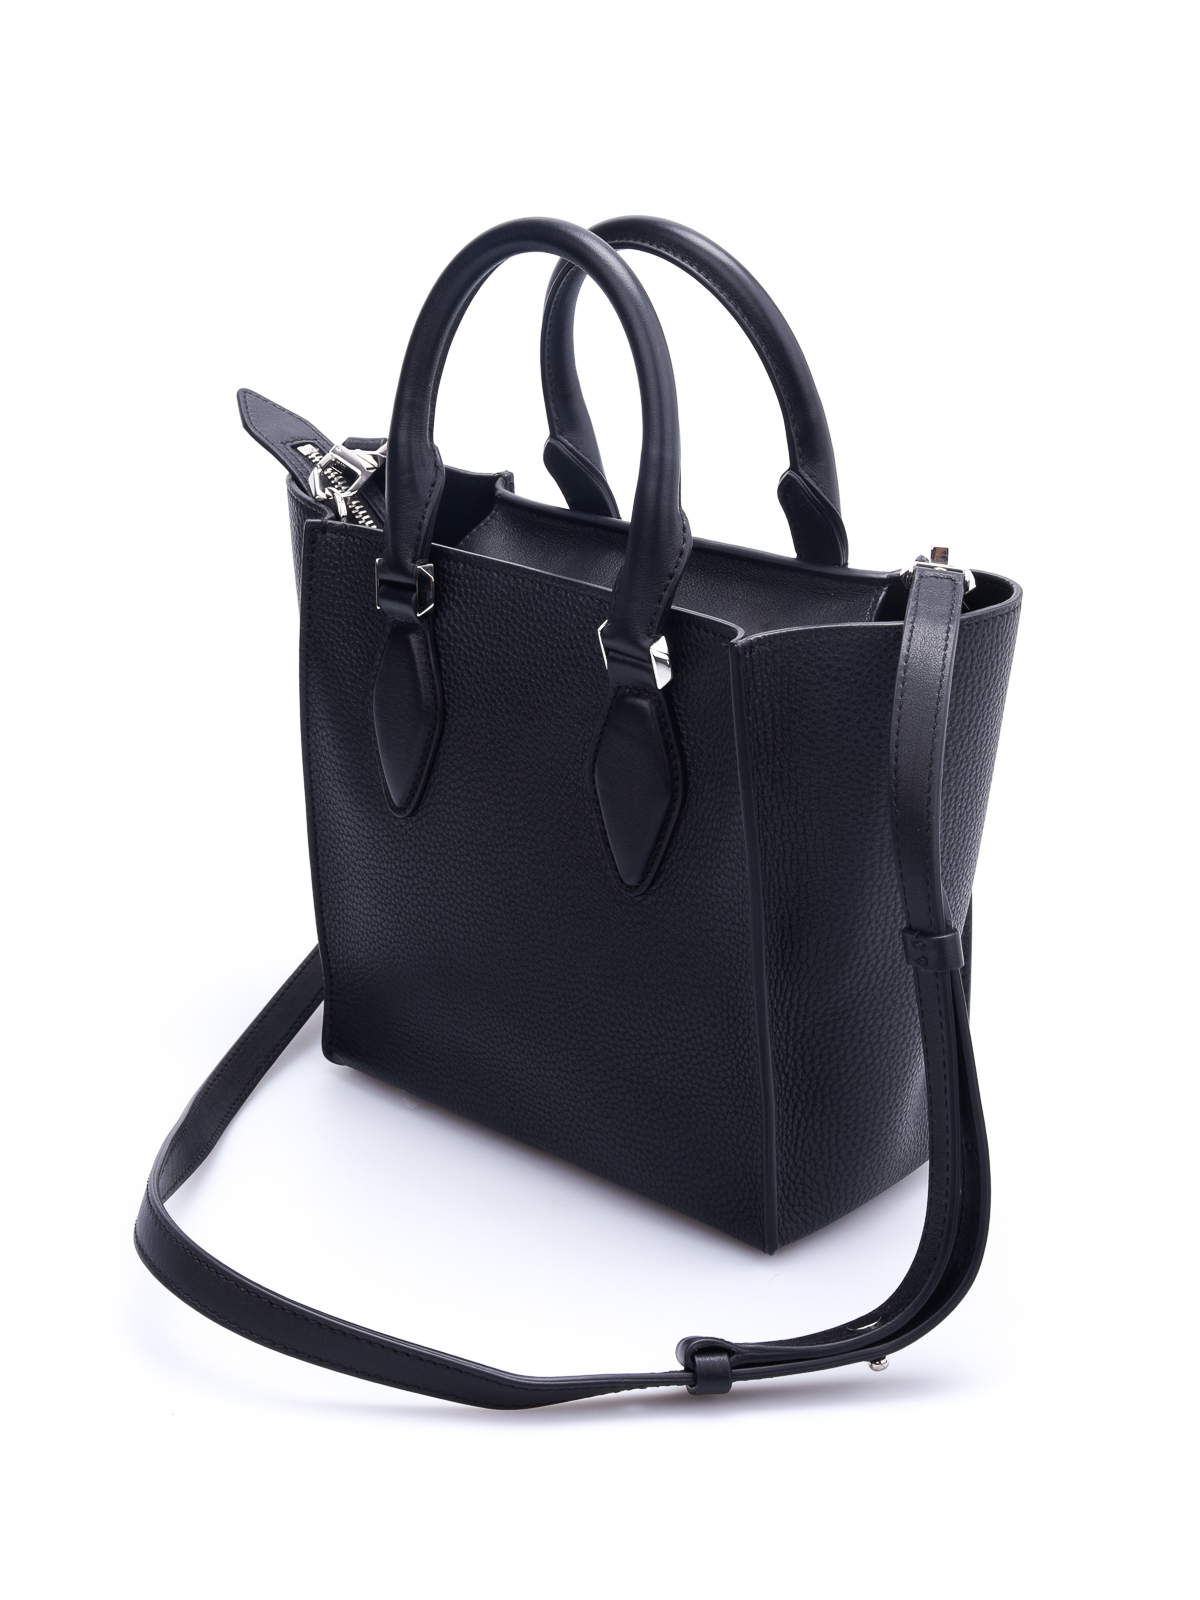 Totes bags Michael Kors - Gracie Small tote - 31FSPGRT1UBLACK 